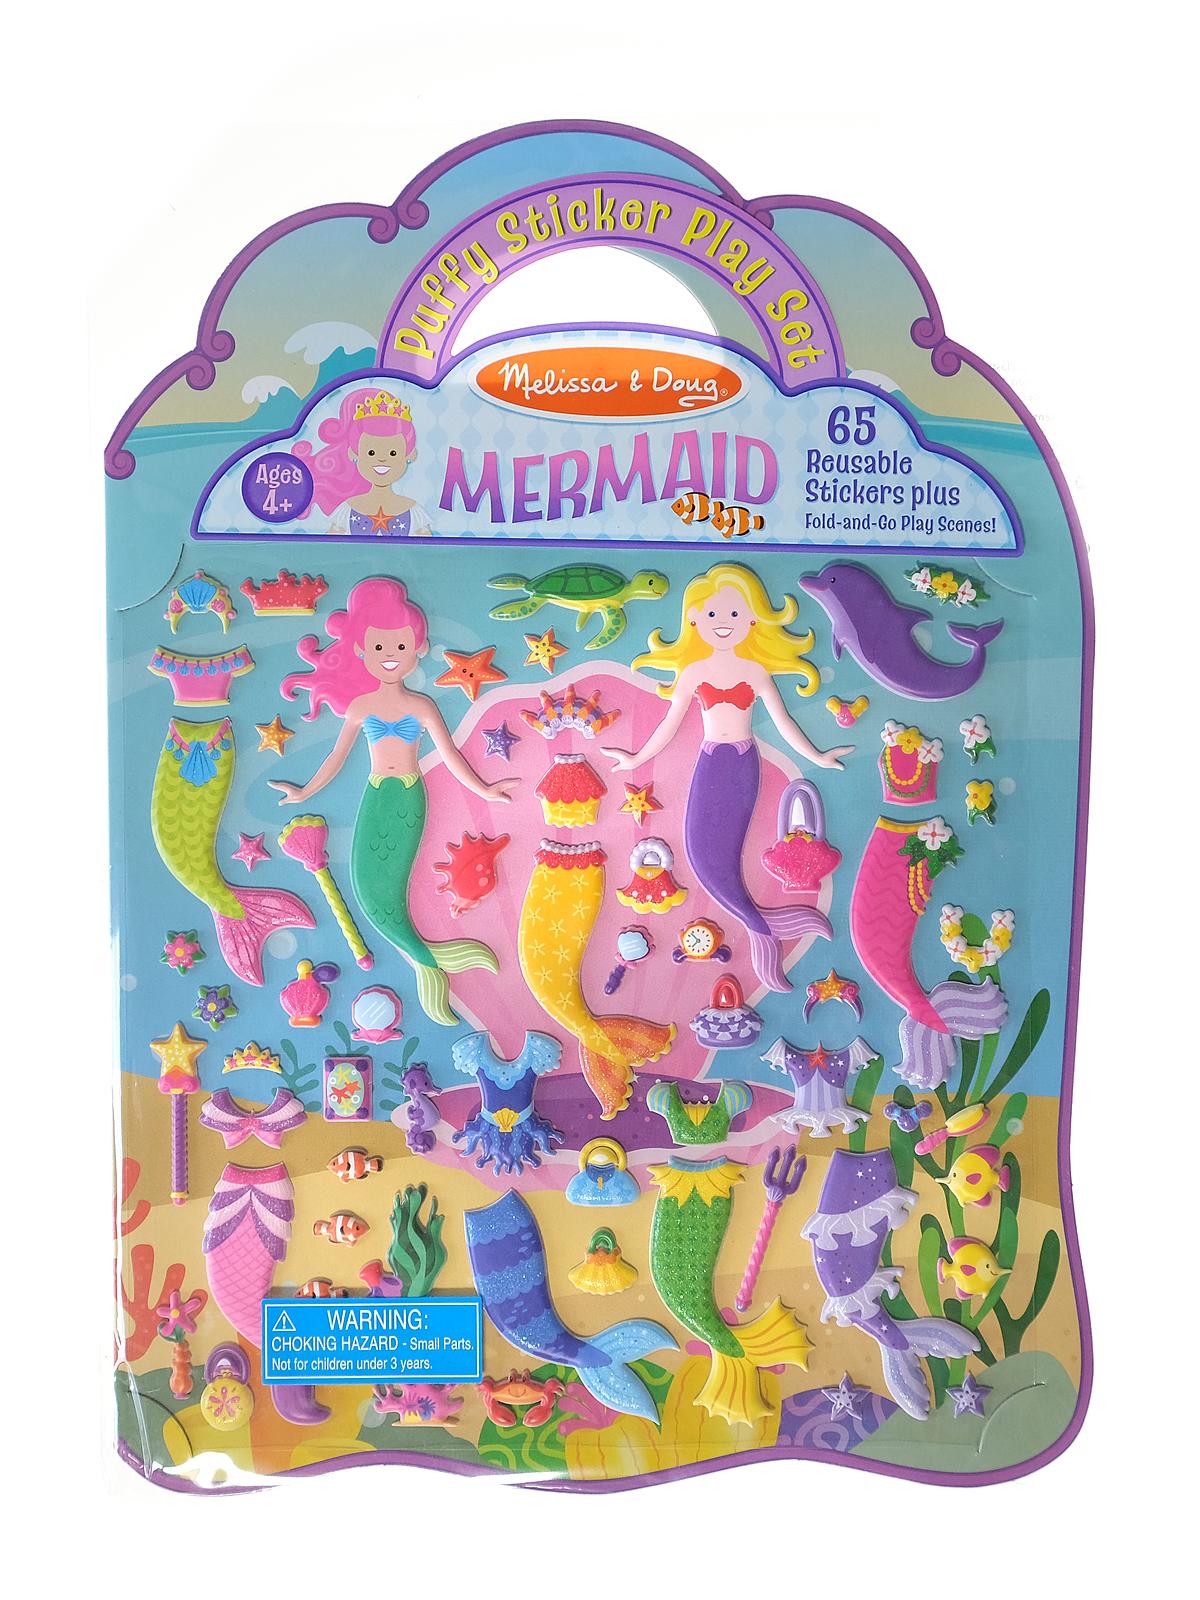 Reusable Puffy Sticker Play Sets Mermaid 65 Pieces